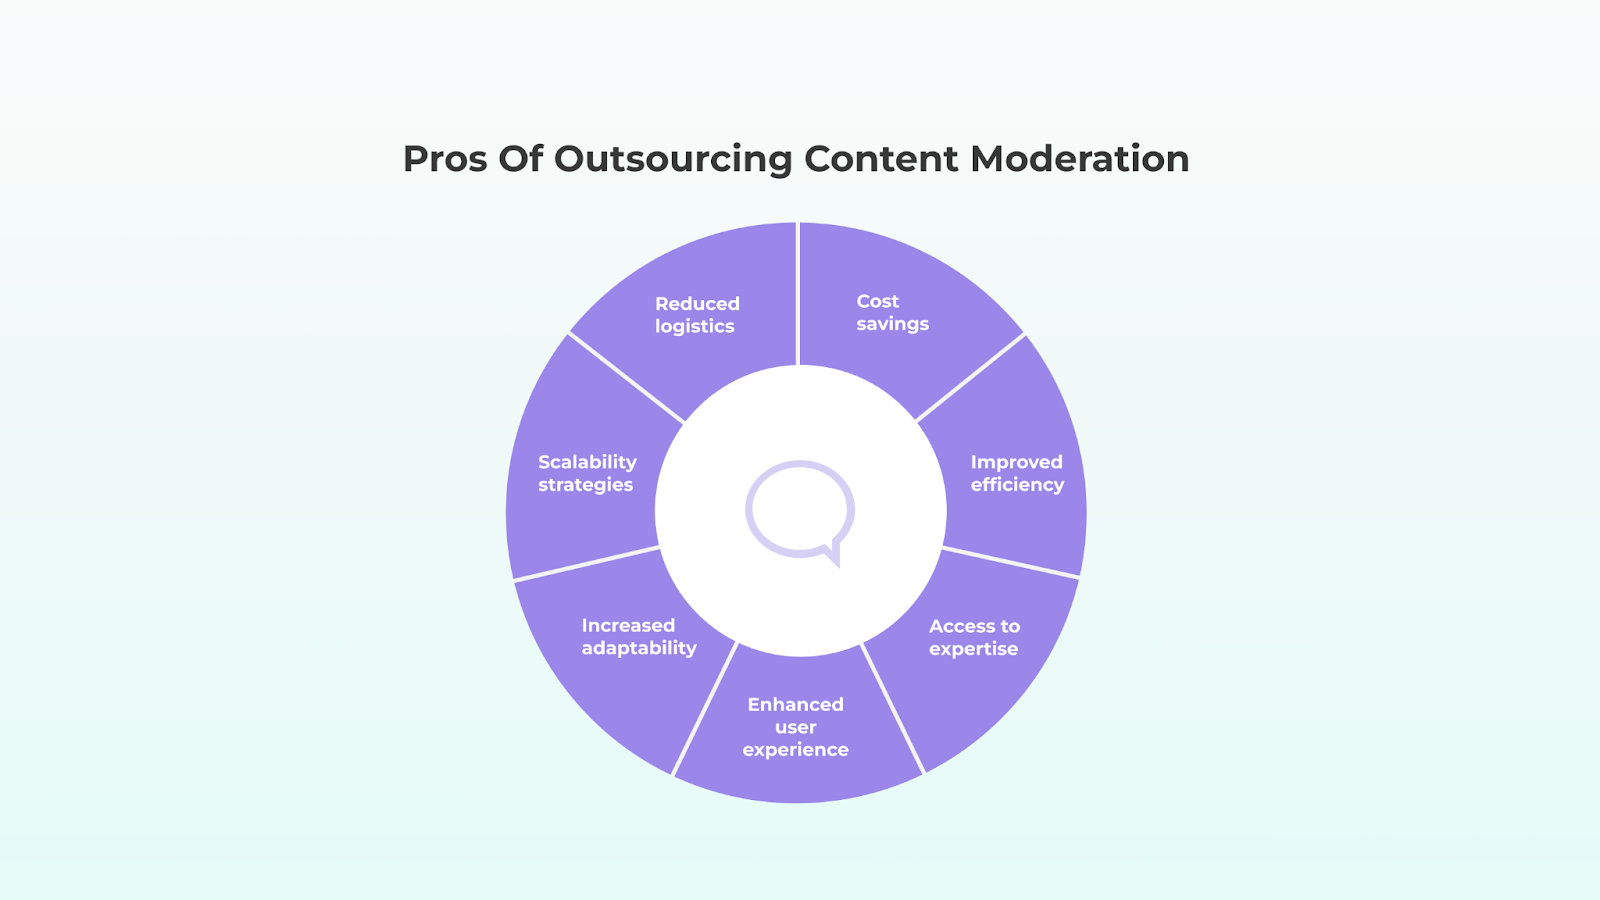 Pros of Outsourcing Content Moderation